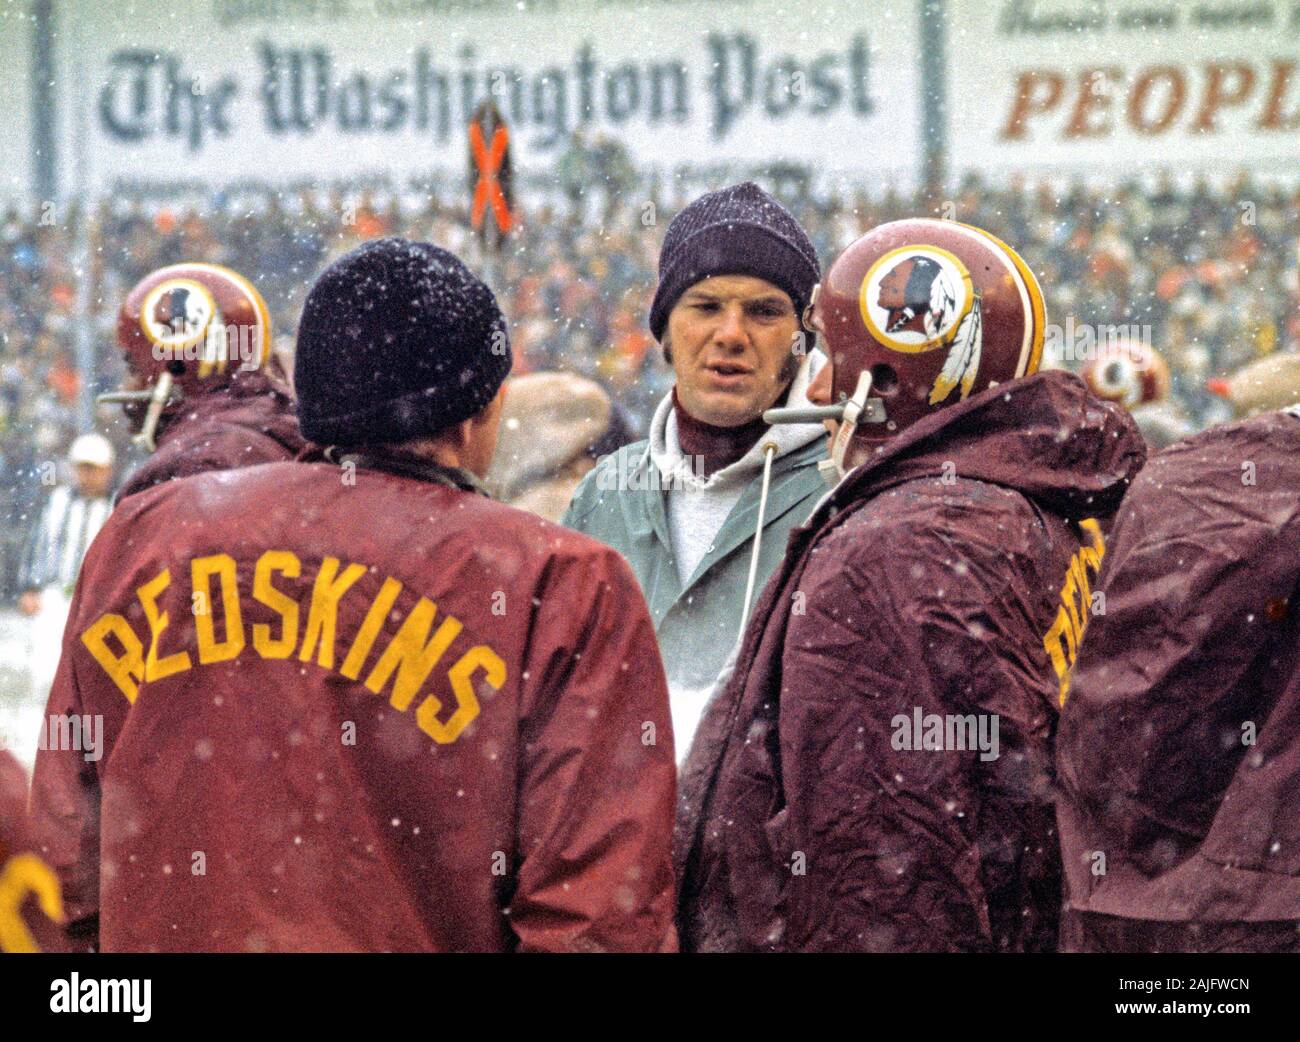 https://c8.alamy.com/comp/2AJFWCN/washington-redskins-back-up-quarterback-sam-wyche-18-center-discusses-strategy-with-fellow-quarterbacks-sonny-jurgensen-9-left-and-billy-kilmer-17-right-on-the-sidelines-during-the-game-against-the-philadelphia-eagles-at-rfk-stadium-in-washington-dc-on-sunday-december-16-1973-the-redskins-won-the-game-38-20-to-end-their-regular-season-with-ten-wins-and-four-losses-to-qualify-for-the-nfc-play-offscredit-arnie-sachscnp-usage-worldwide-2AJFWCN.jpg